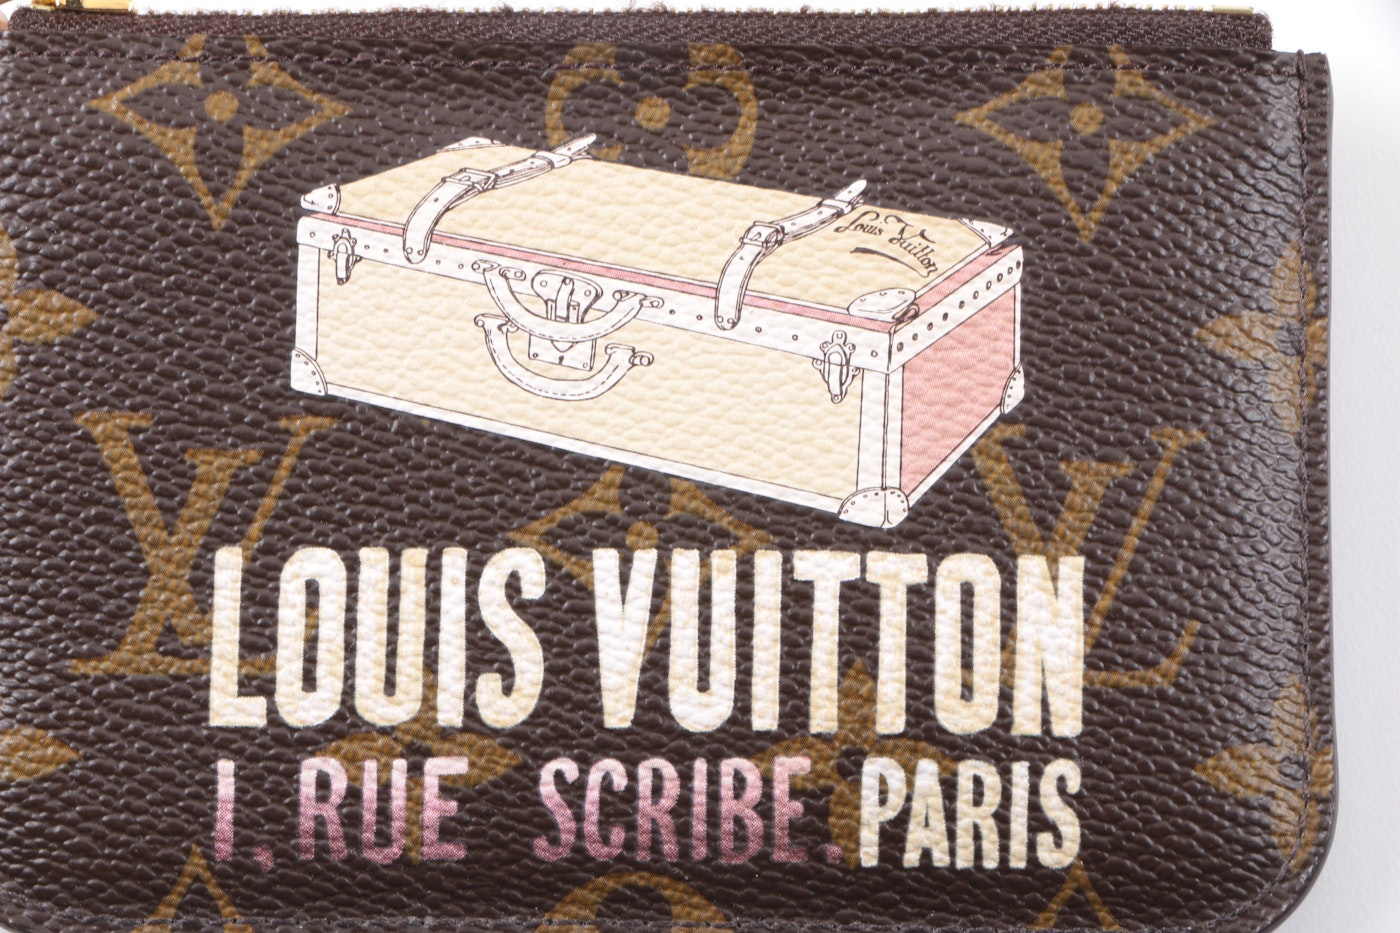 Limited Edition Louis Vuitton I. Rue Scribe Paris Monogrammed Key Pouch | EBTH